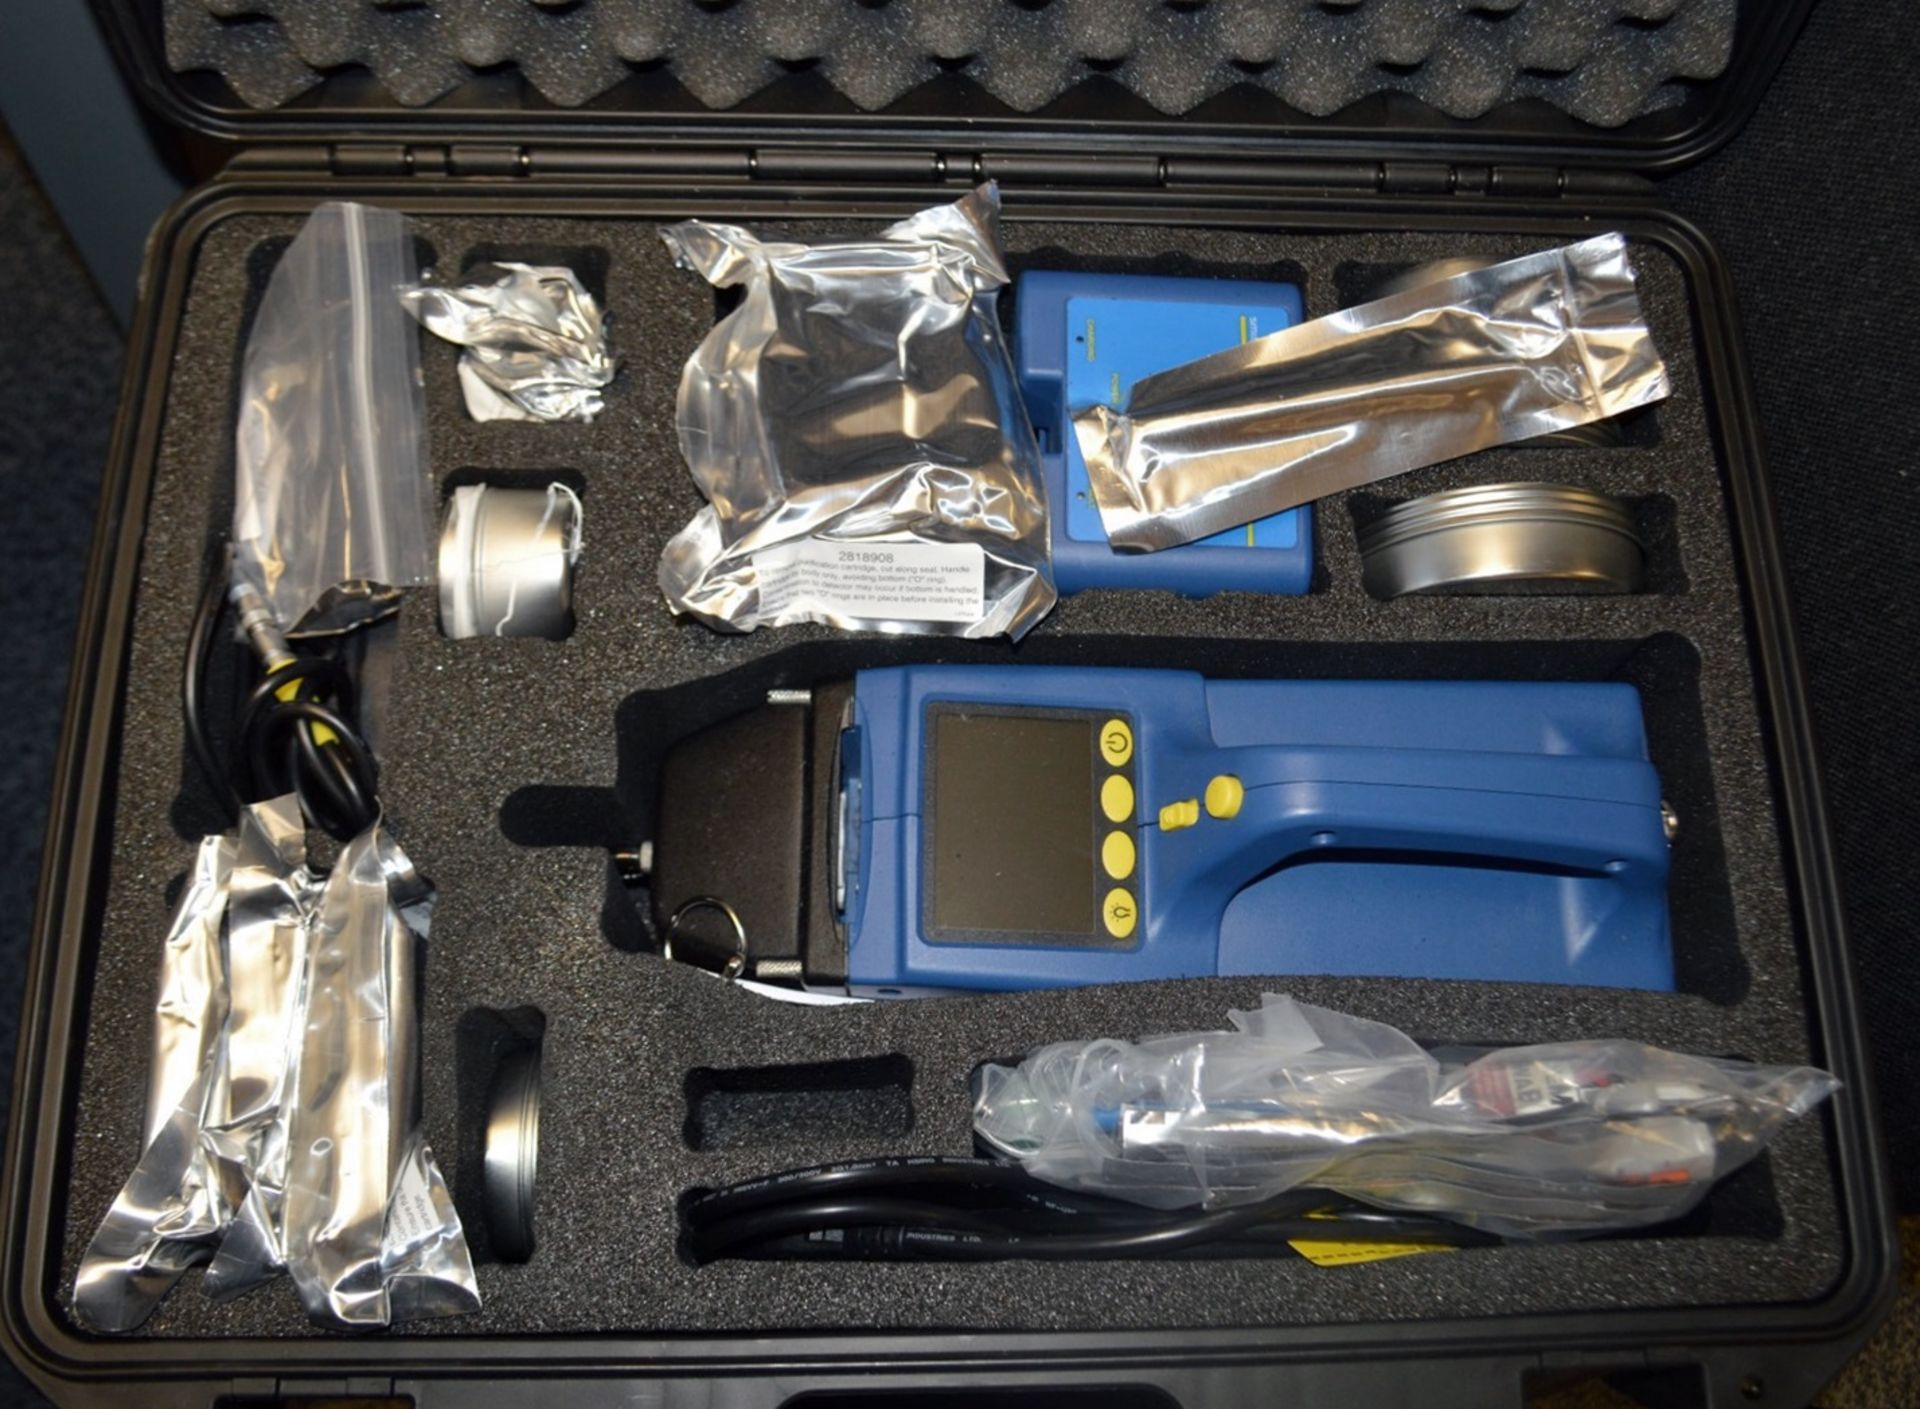 1 x SABRE™ 5000 Handheld Trace Detector - For Explosives, Chemical Agents - Original Price £24,500 - Image 3 of 31